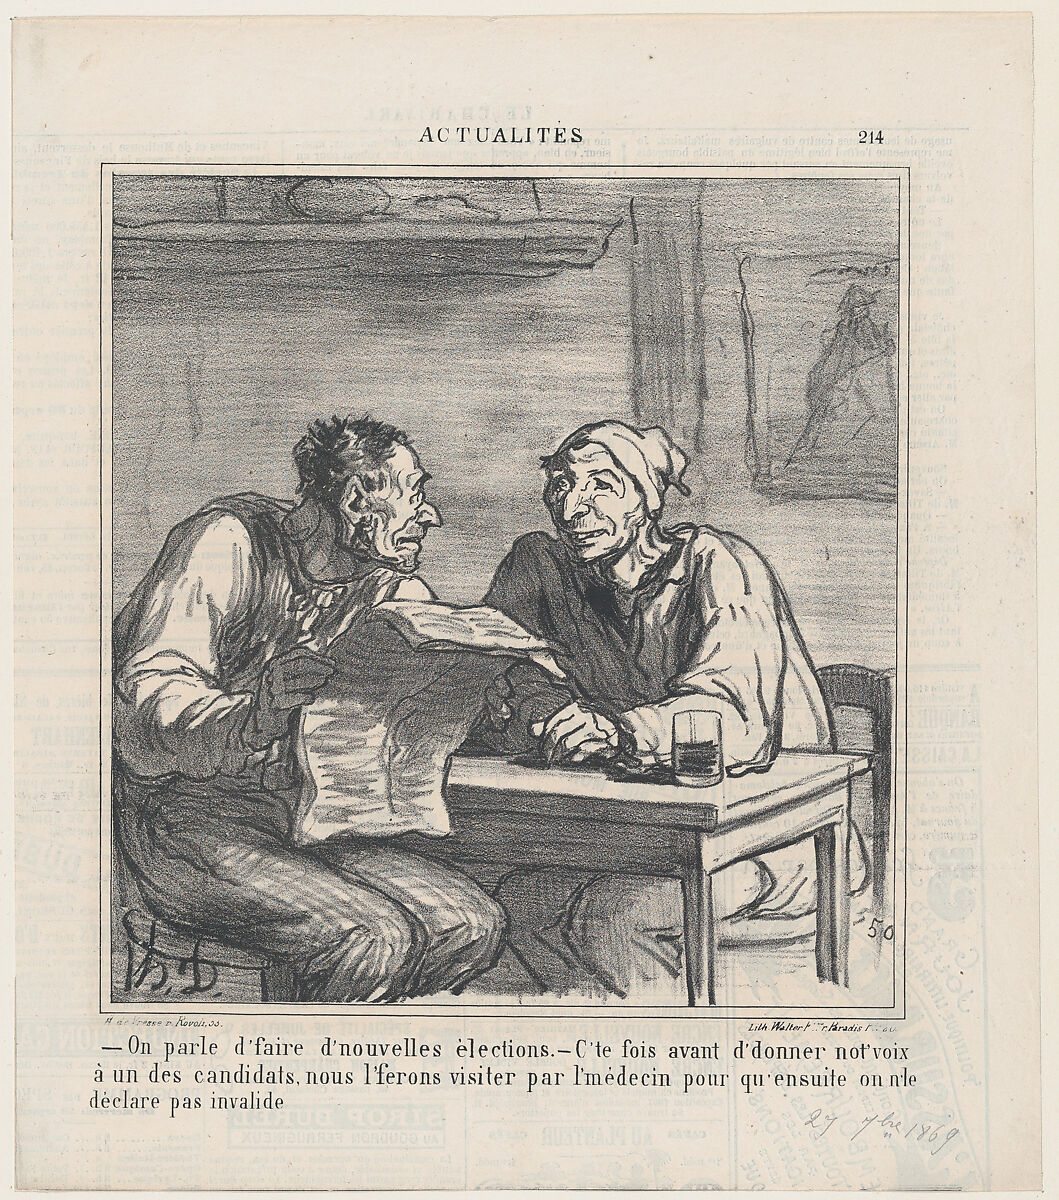 –They're talking about new elections. –Before I vote for a candidate, I want him to be examined by a doctor to make sure he is not declared invalid again, from 'News of the day,' published in Le Charivari, September 27, 1869, Honoré Daumier (French, Marseilles 1808–1879 Valmondois), Lithograph on newsprint; third state of three (Delteil) 